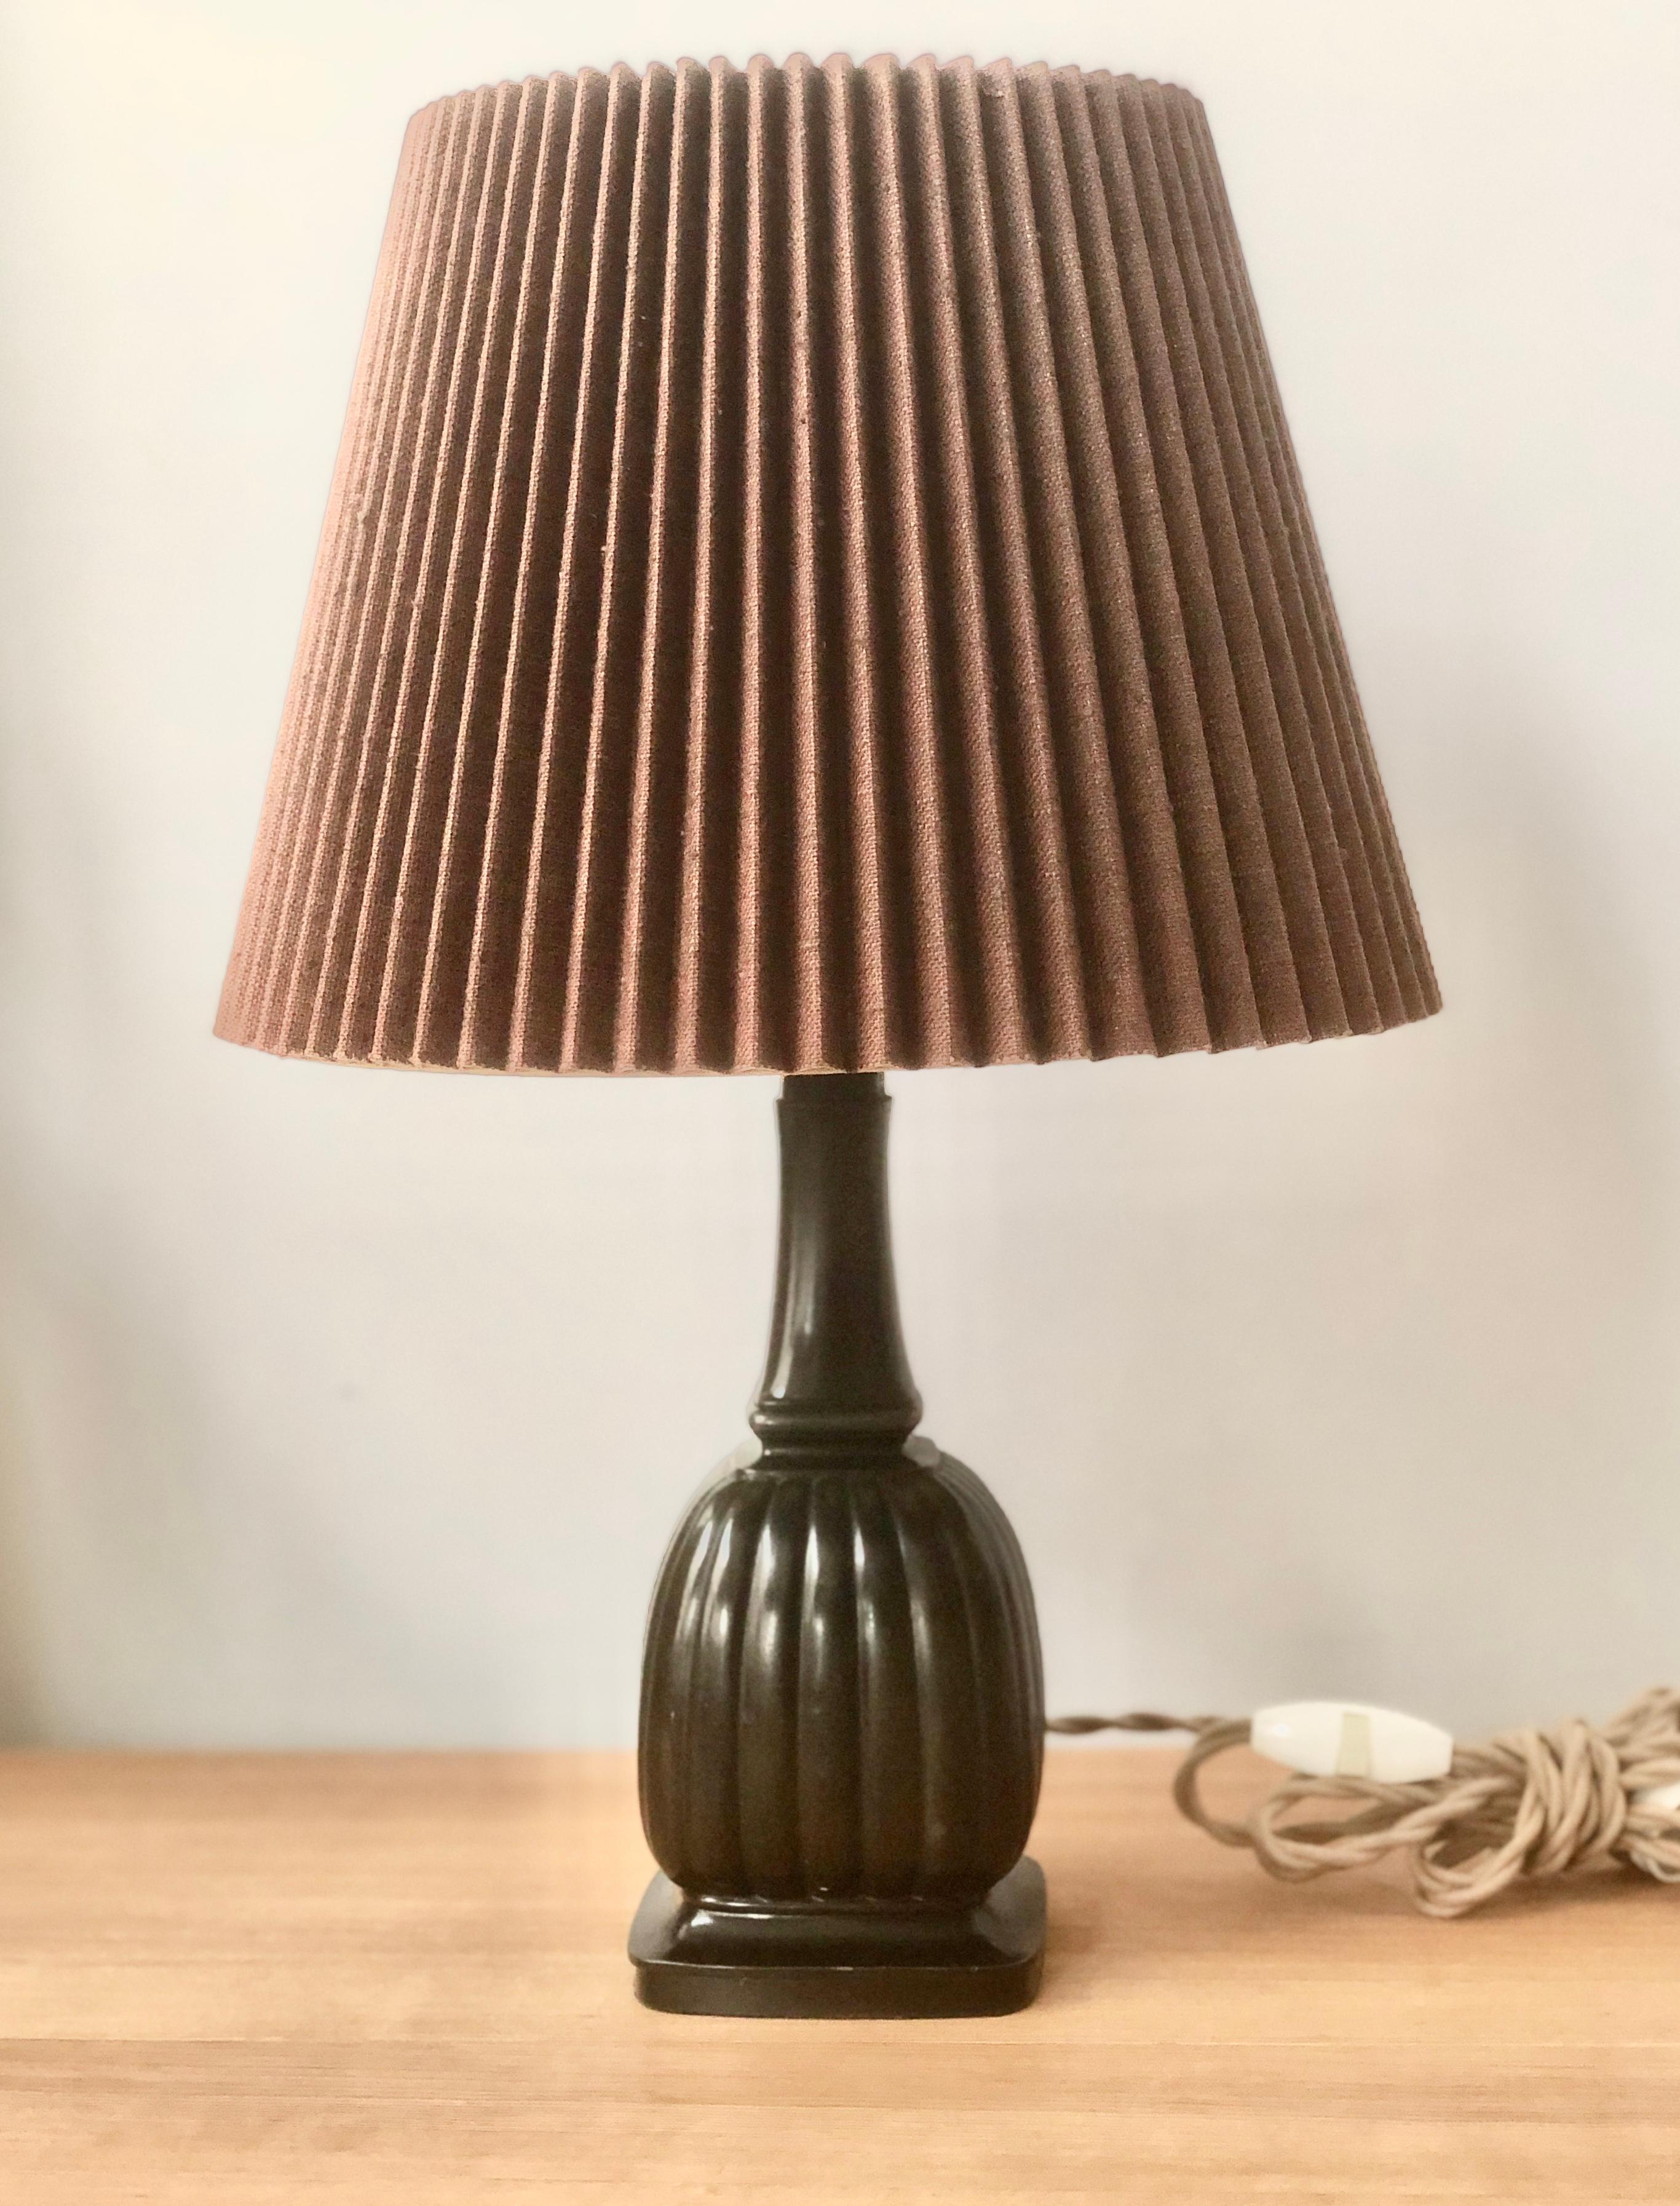 A table lamp designed by Just Andersen , Model 1856.
Patinated Disco metal. Stamped Just.A. Denmark 1856. Circa 1930th.
Just Andersen ( 1884-1943), Danish decorative sculptor and silversmith.
Newly rewired.
Dimensions: W 4